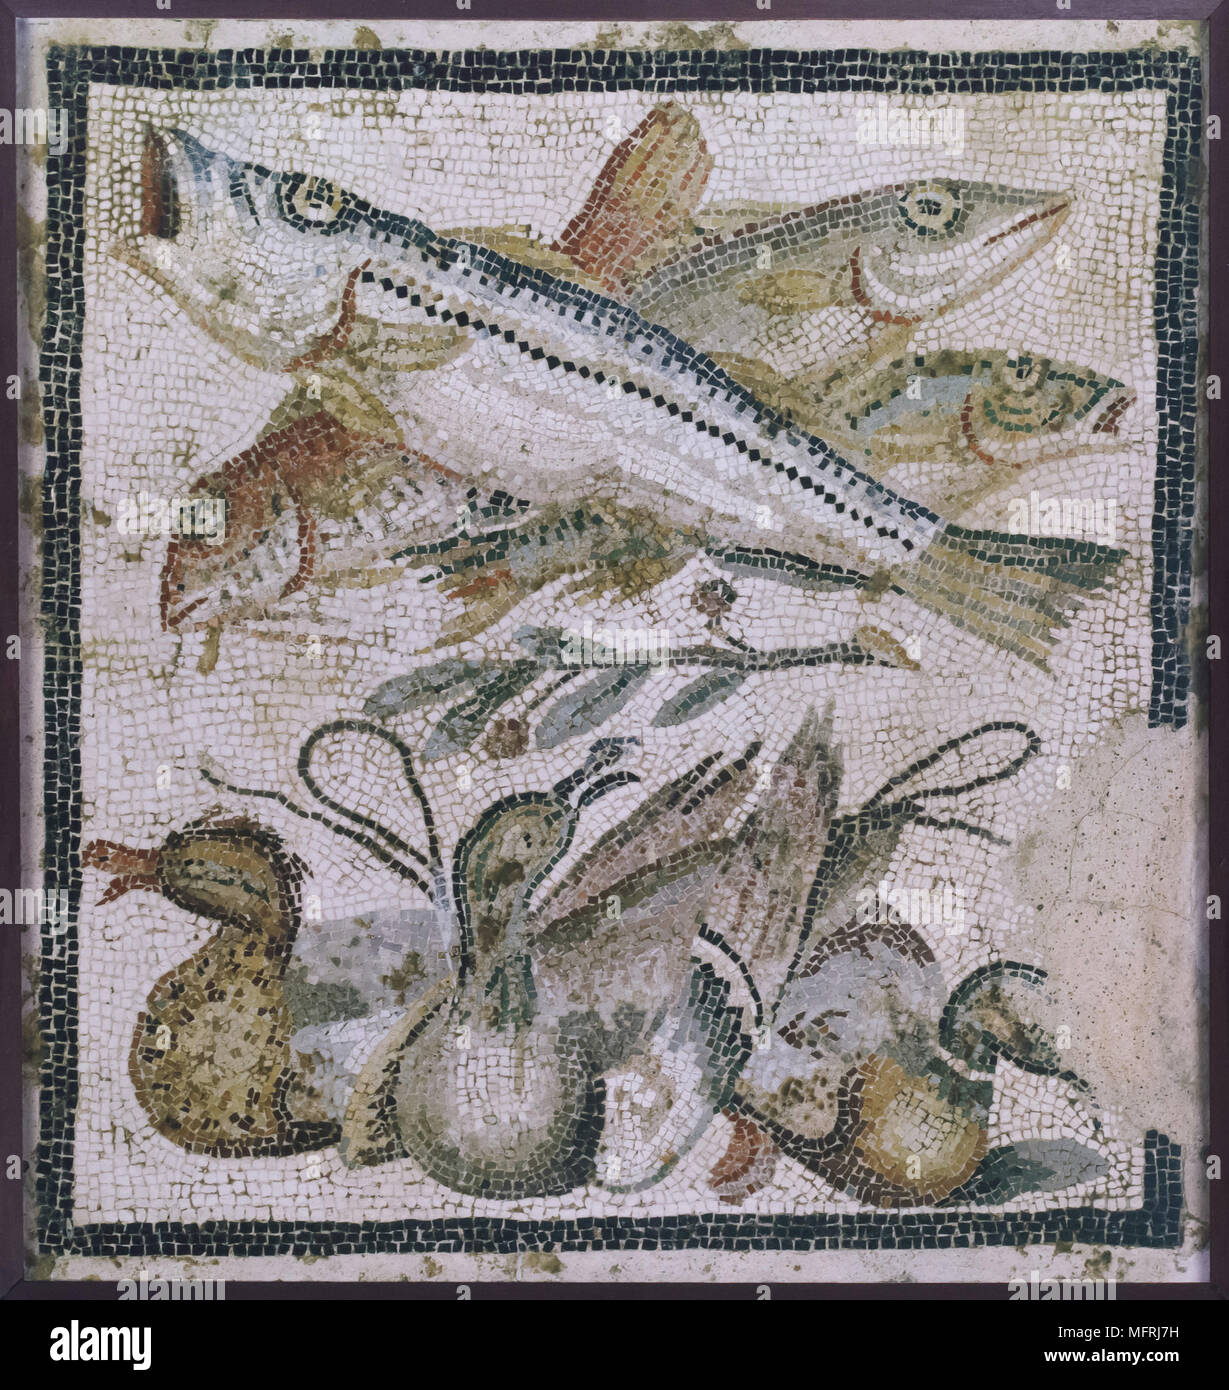 Fish and ducks depicted in the Roman mosaic dated from 90-20 BC from the Casa del Granduca di Toscana (House of the Grand Duke) in Pompeii, now on display in the National Archaeological Museum (Museo Archeologico Nazionale di Napoli) in Naples, Campania, Italy. Stock Photo